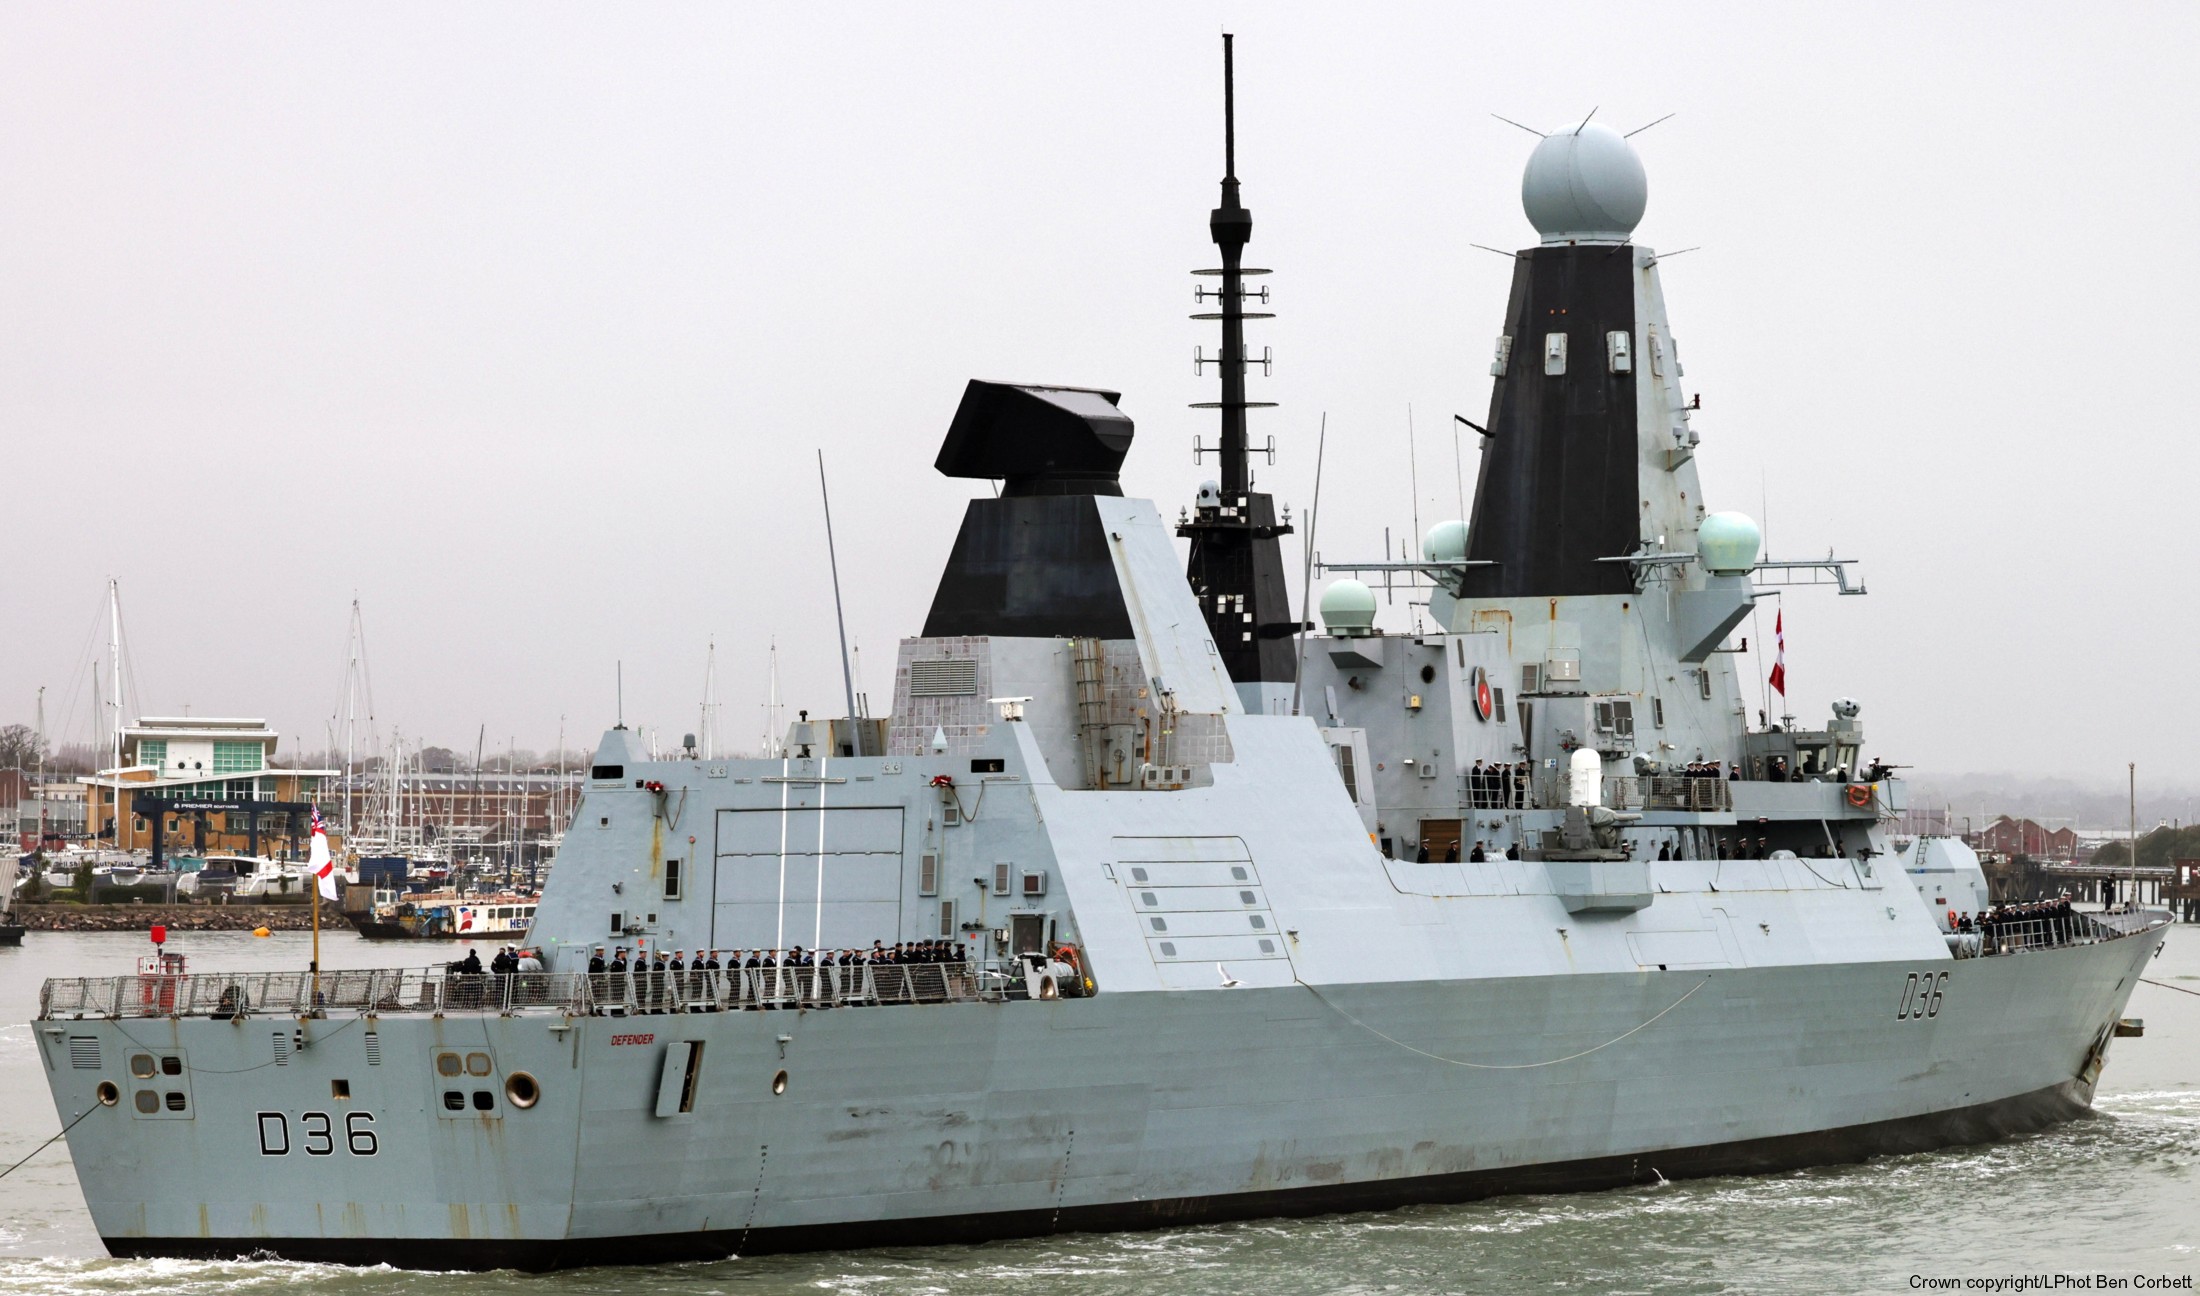 d36 hms defender d-36 type 45 daring class guided missile destroyer ddg royal navy sea viper 30